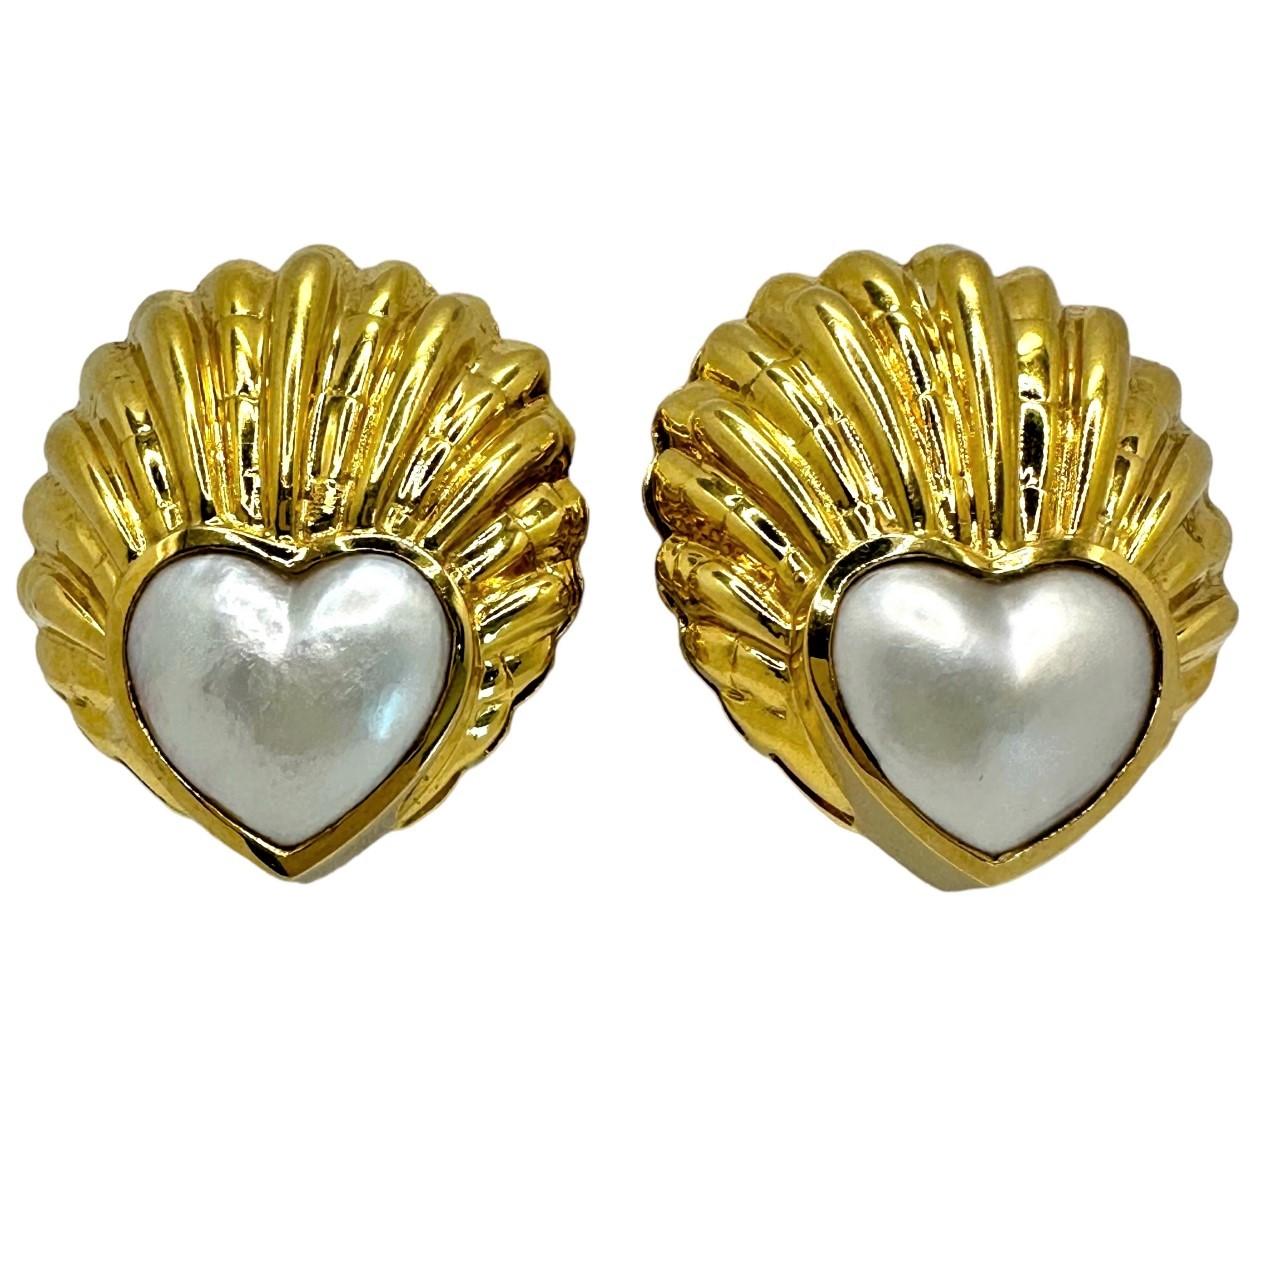 This imaginative pair of very well crafted 18k yellow gold seashell motif earrings are bezel set with two heart shaped Mabe pearls, each measuring 17mm x 17mm. Great attention has been paid to detail in the crafting of the gold shell motifs. The